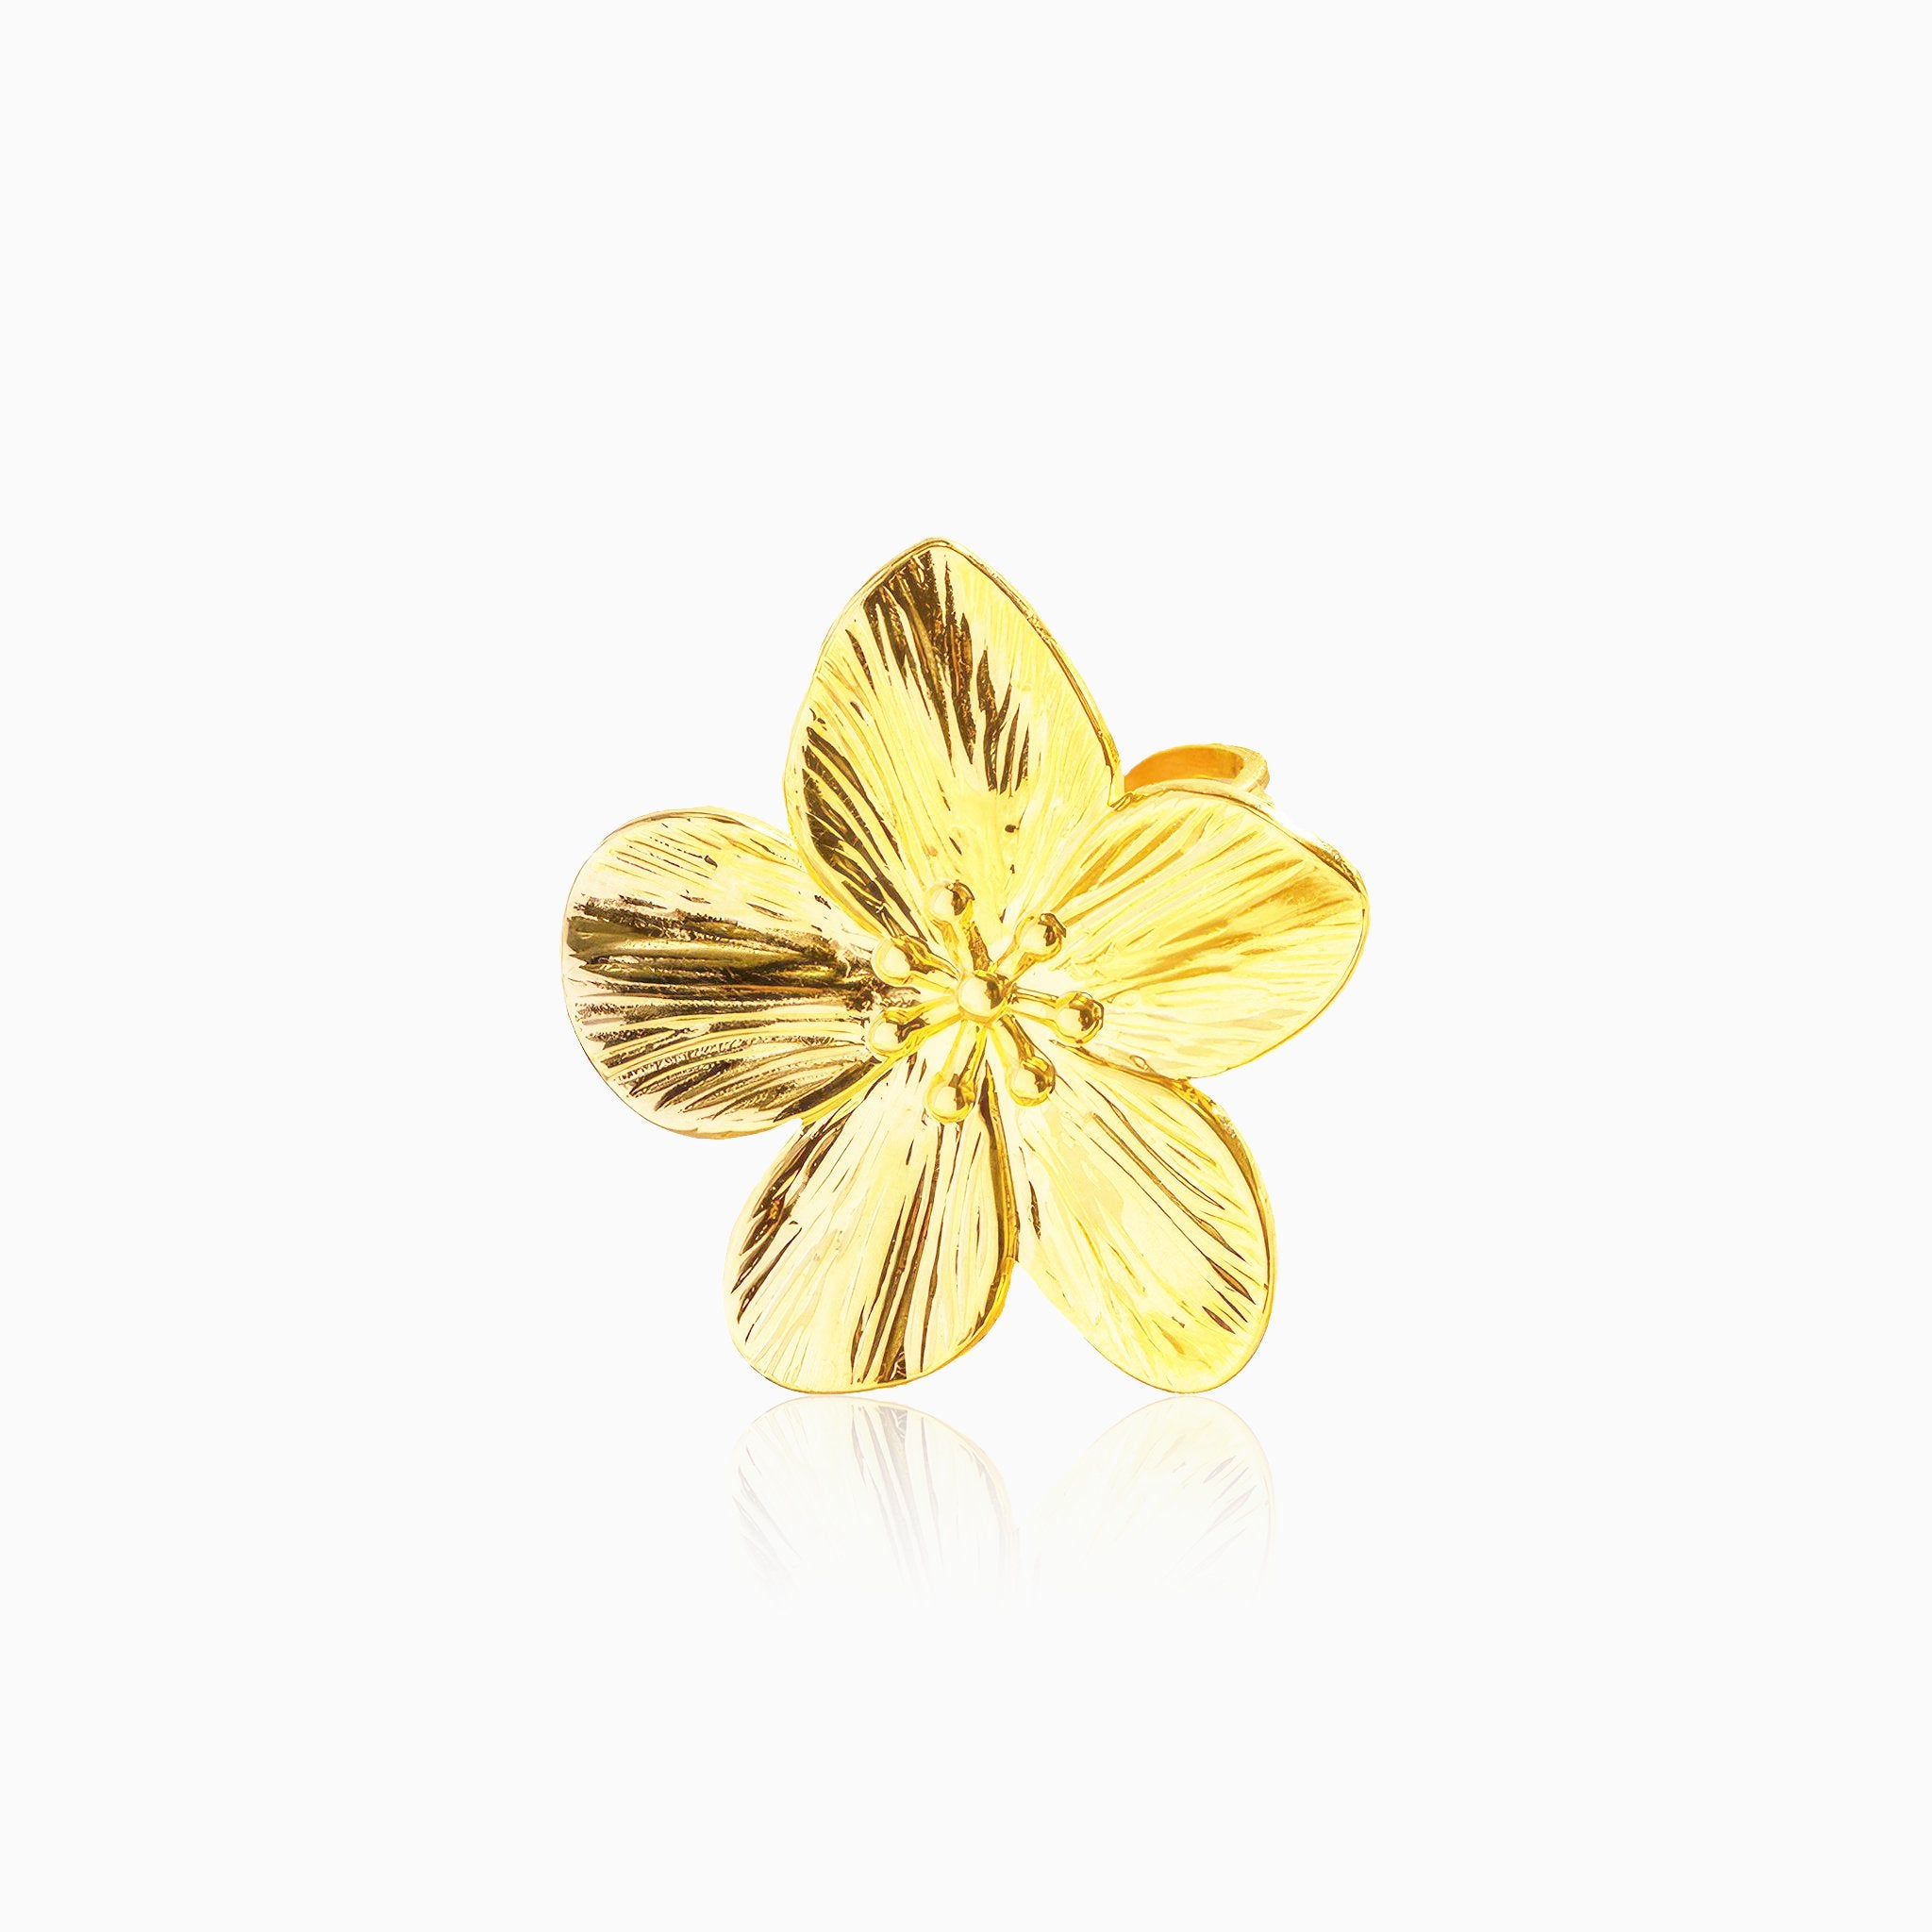 Vintage Flower Versatile Ring - Nobbier - Ring - 18K Gold And Titanium PVD Coated Jewelry